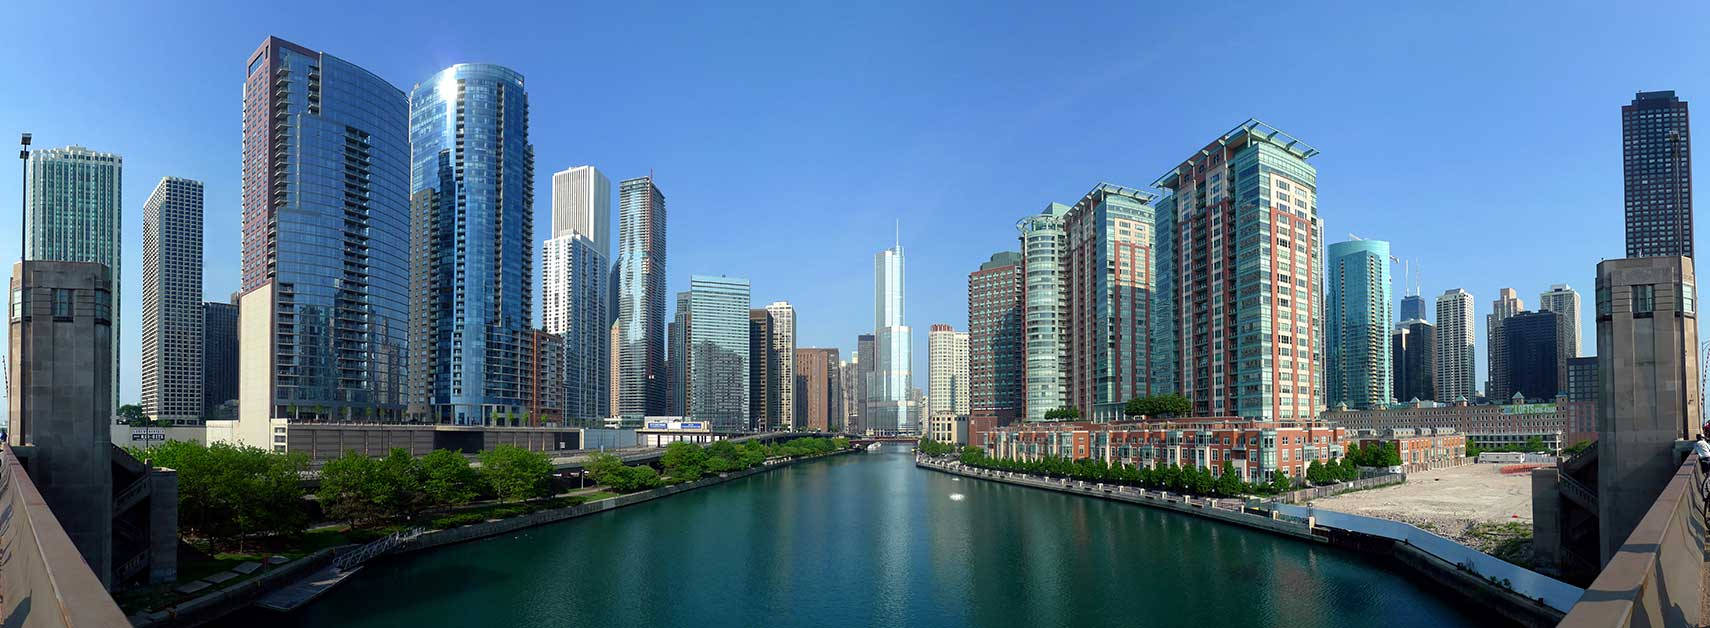 Illinois' Central Business Area Panoramic Photo Wallpaper